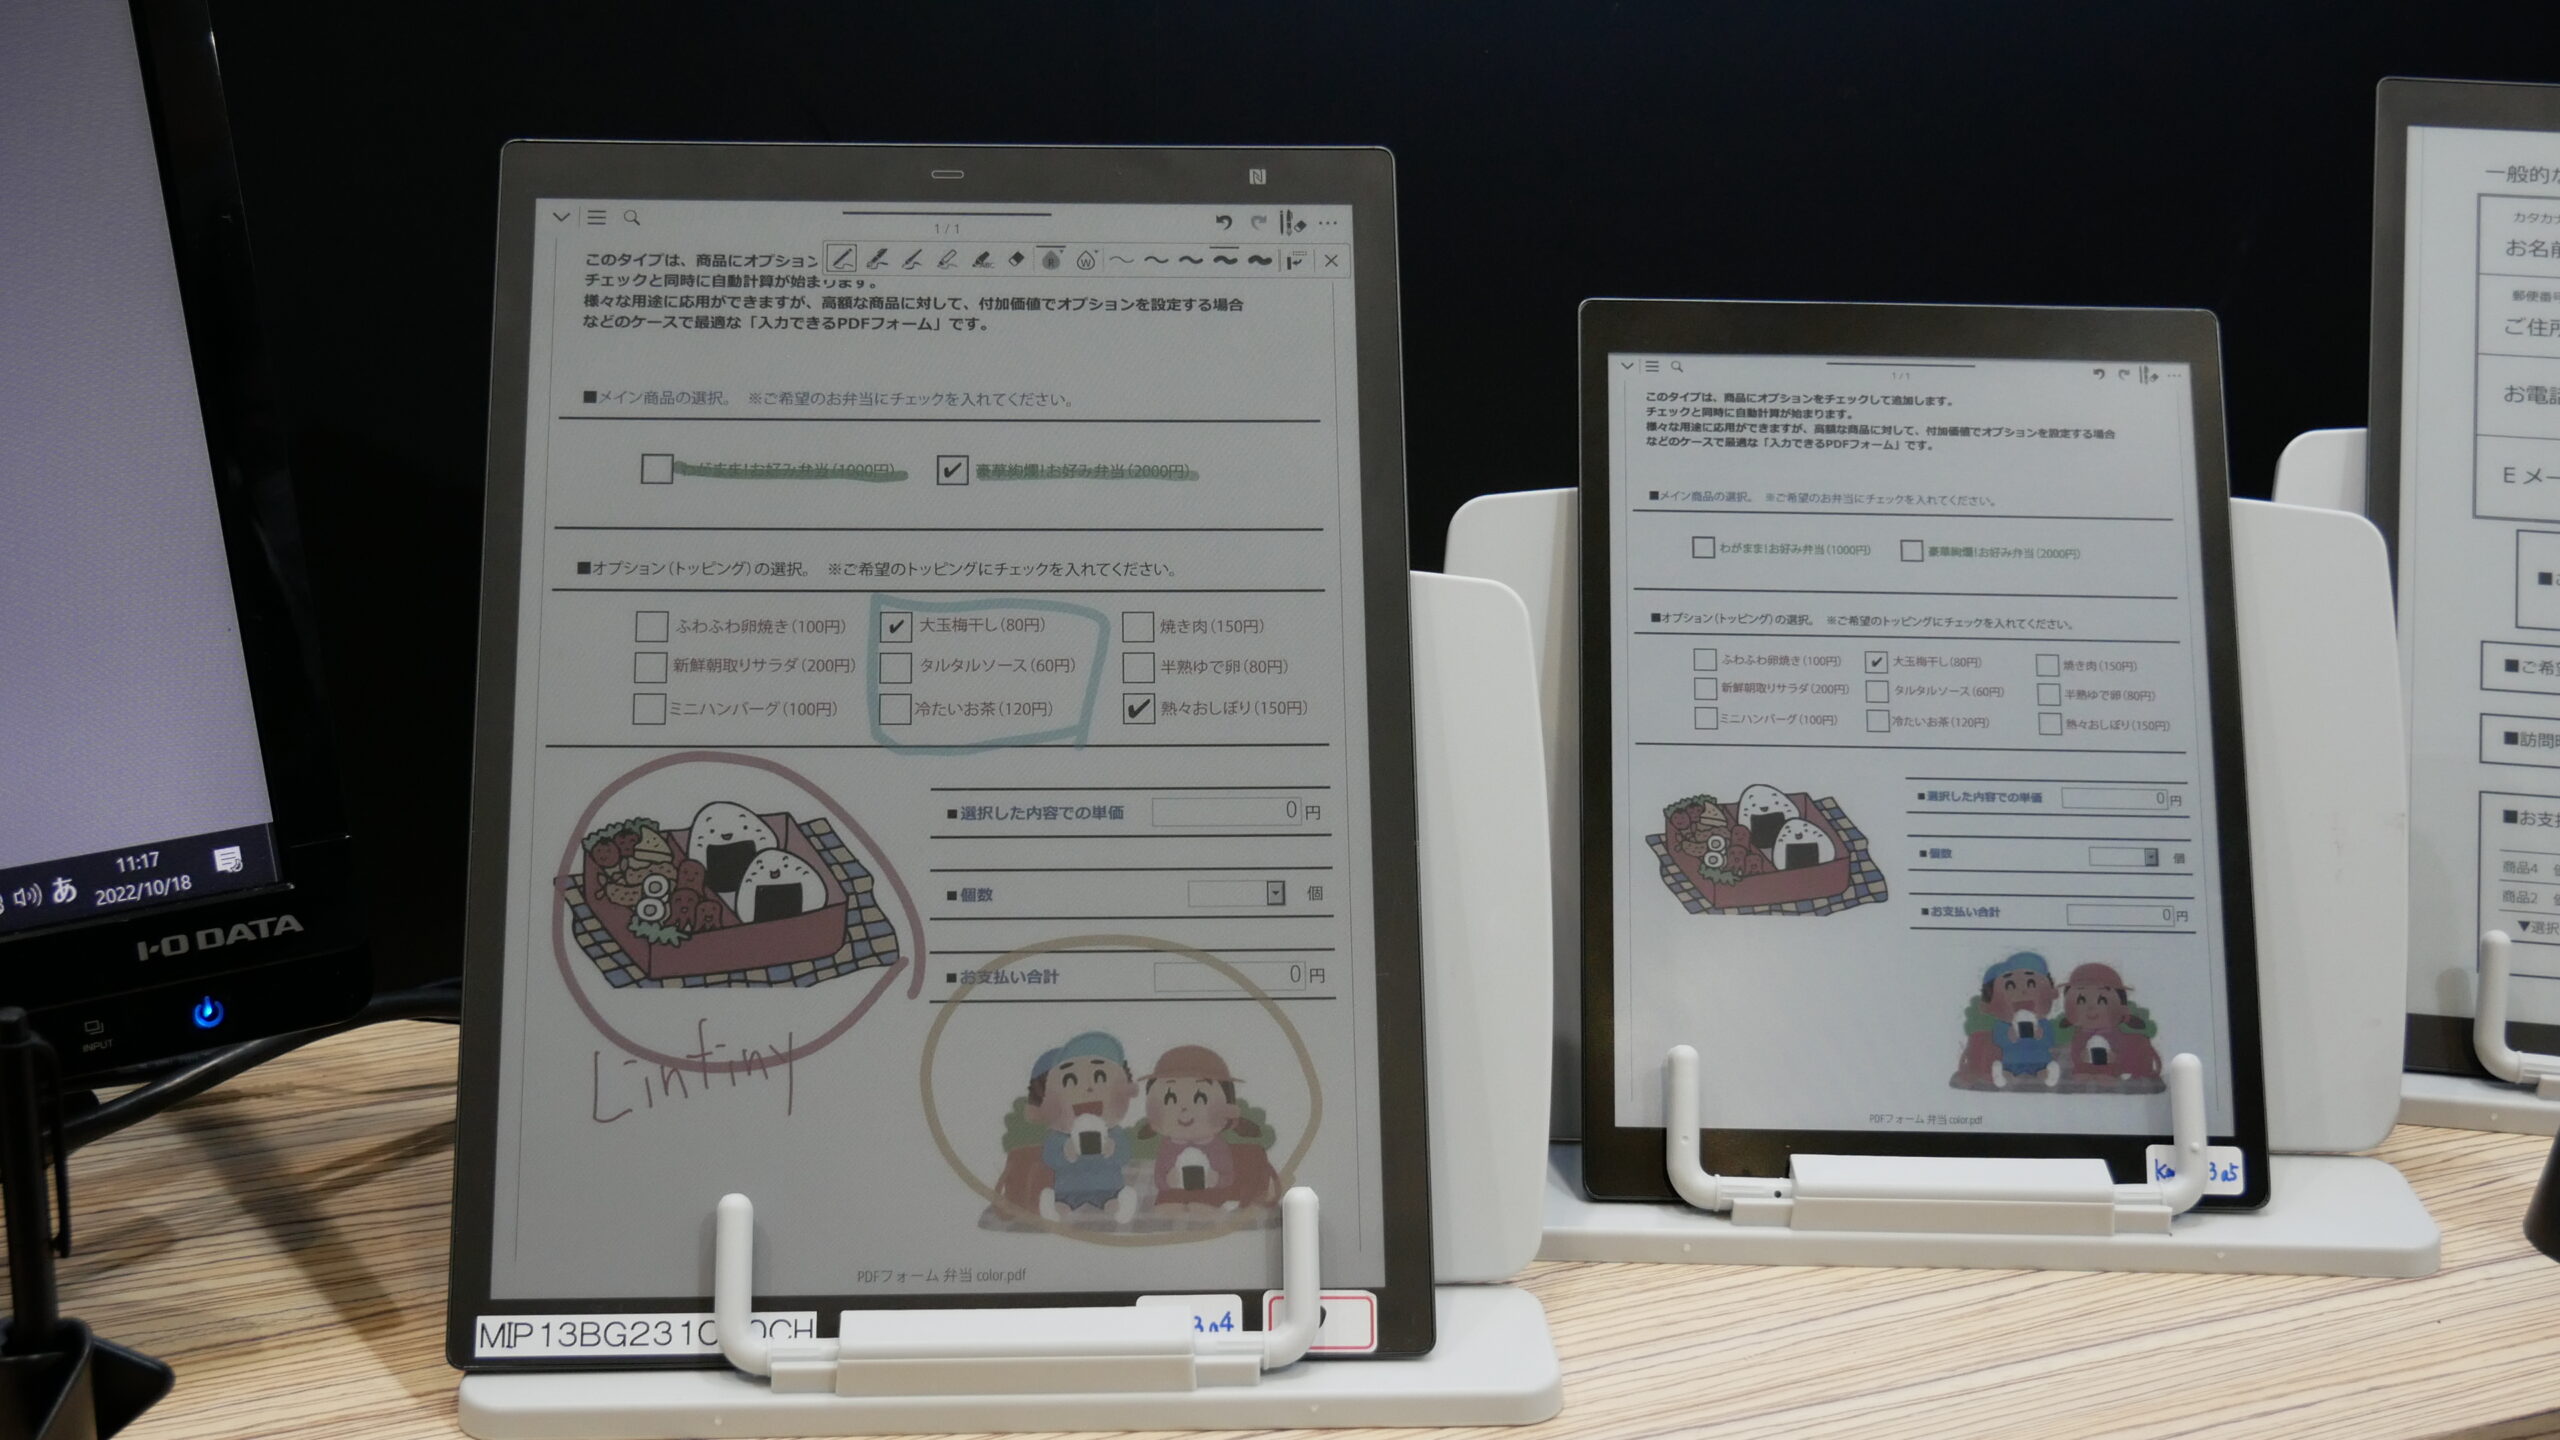 https://goodereader.com/blog/electronic-readers/first-look-at-the-fujitsu-quaderno-a4-with-e-ink-kal